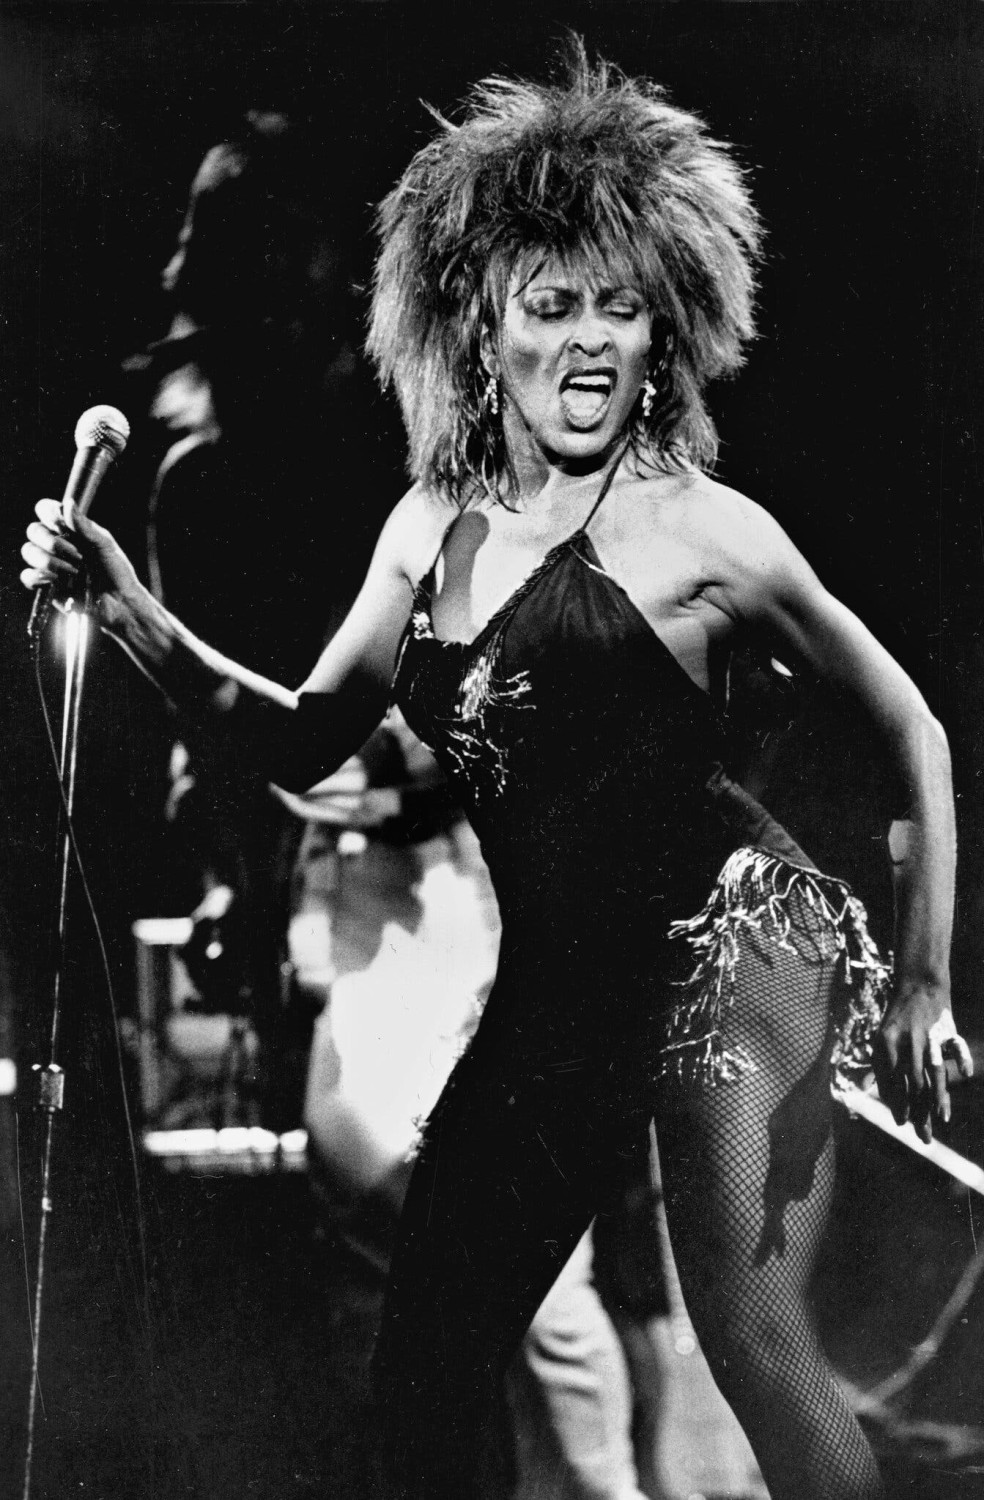 Tina Turner in concert in Los Angeles in 1984. Her album “Private Dancer,” released that year, returned her to the spotlight after a long absence and lifted her into the pop stratosphere.Credit...Phil Ramey/Associated Press